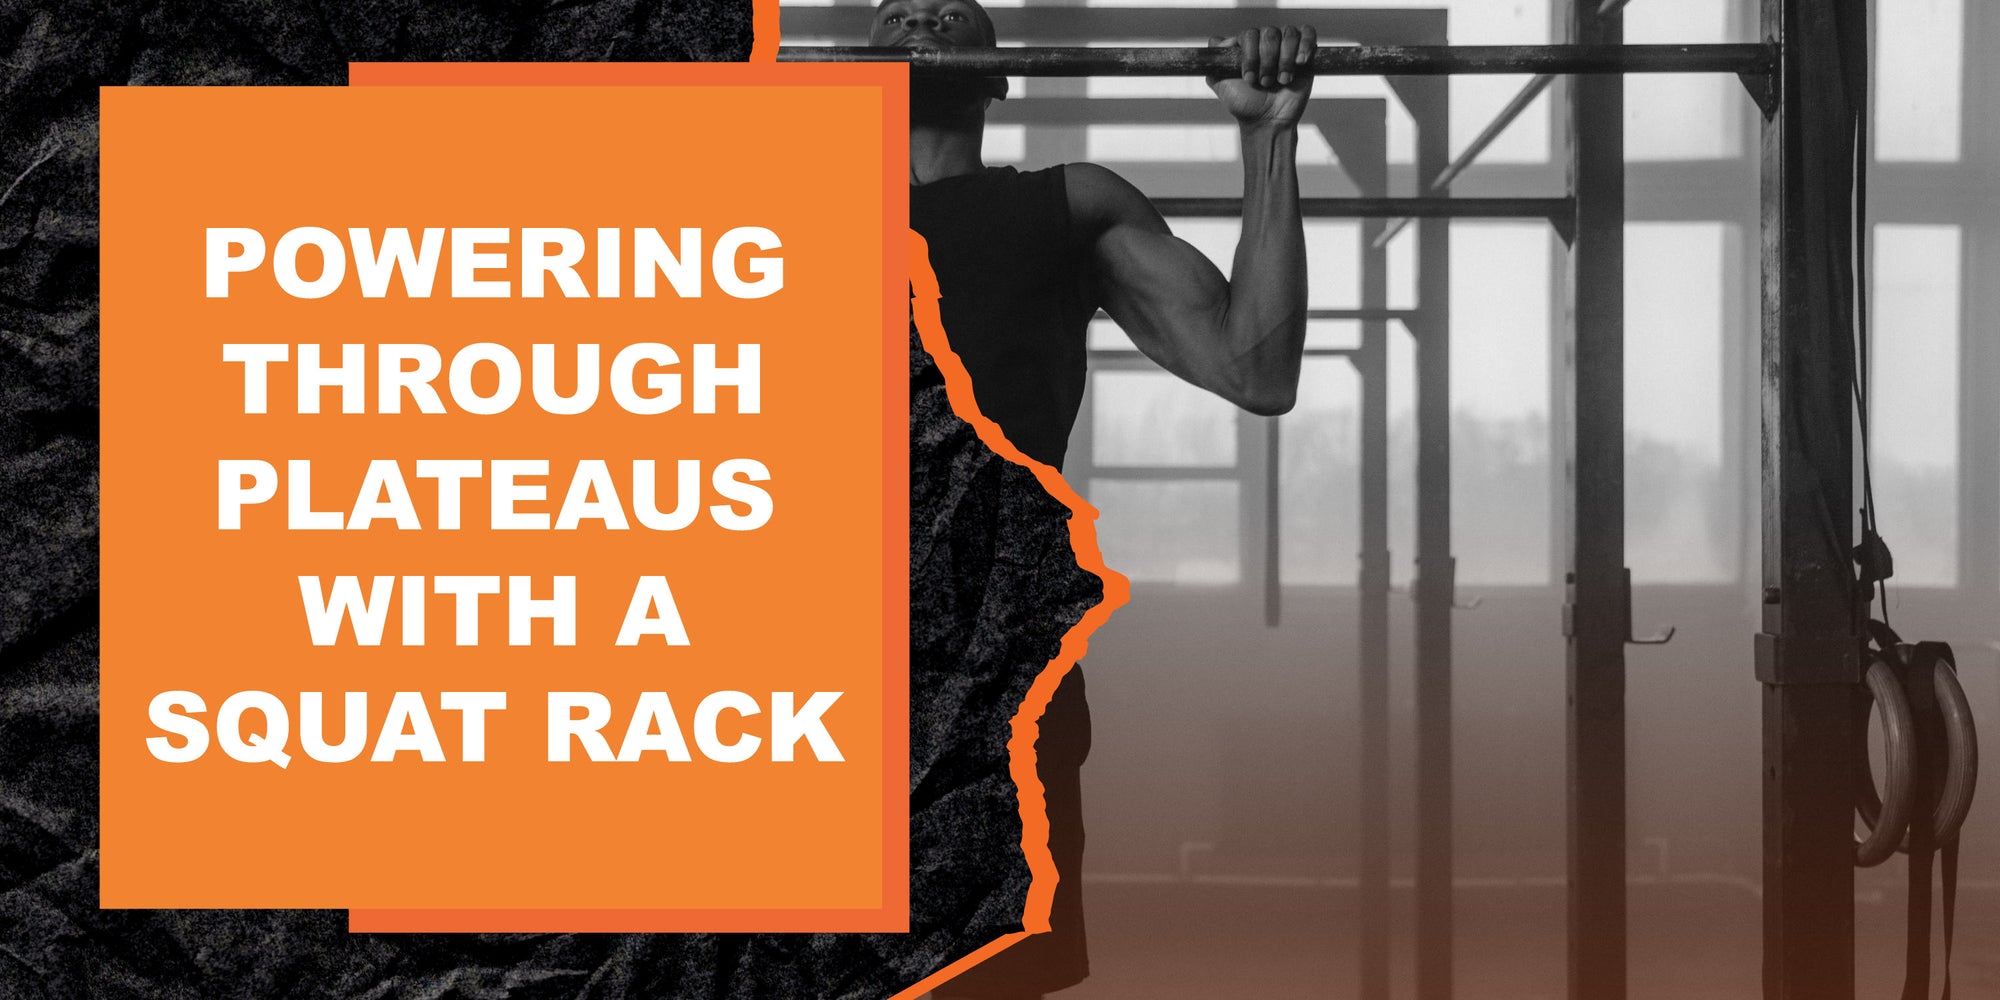 Powering Through Plateaus with a Squat Rack